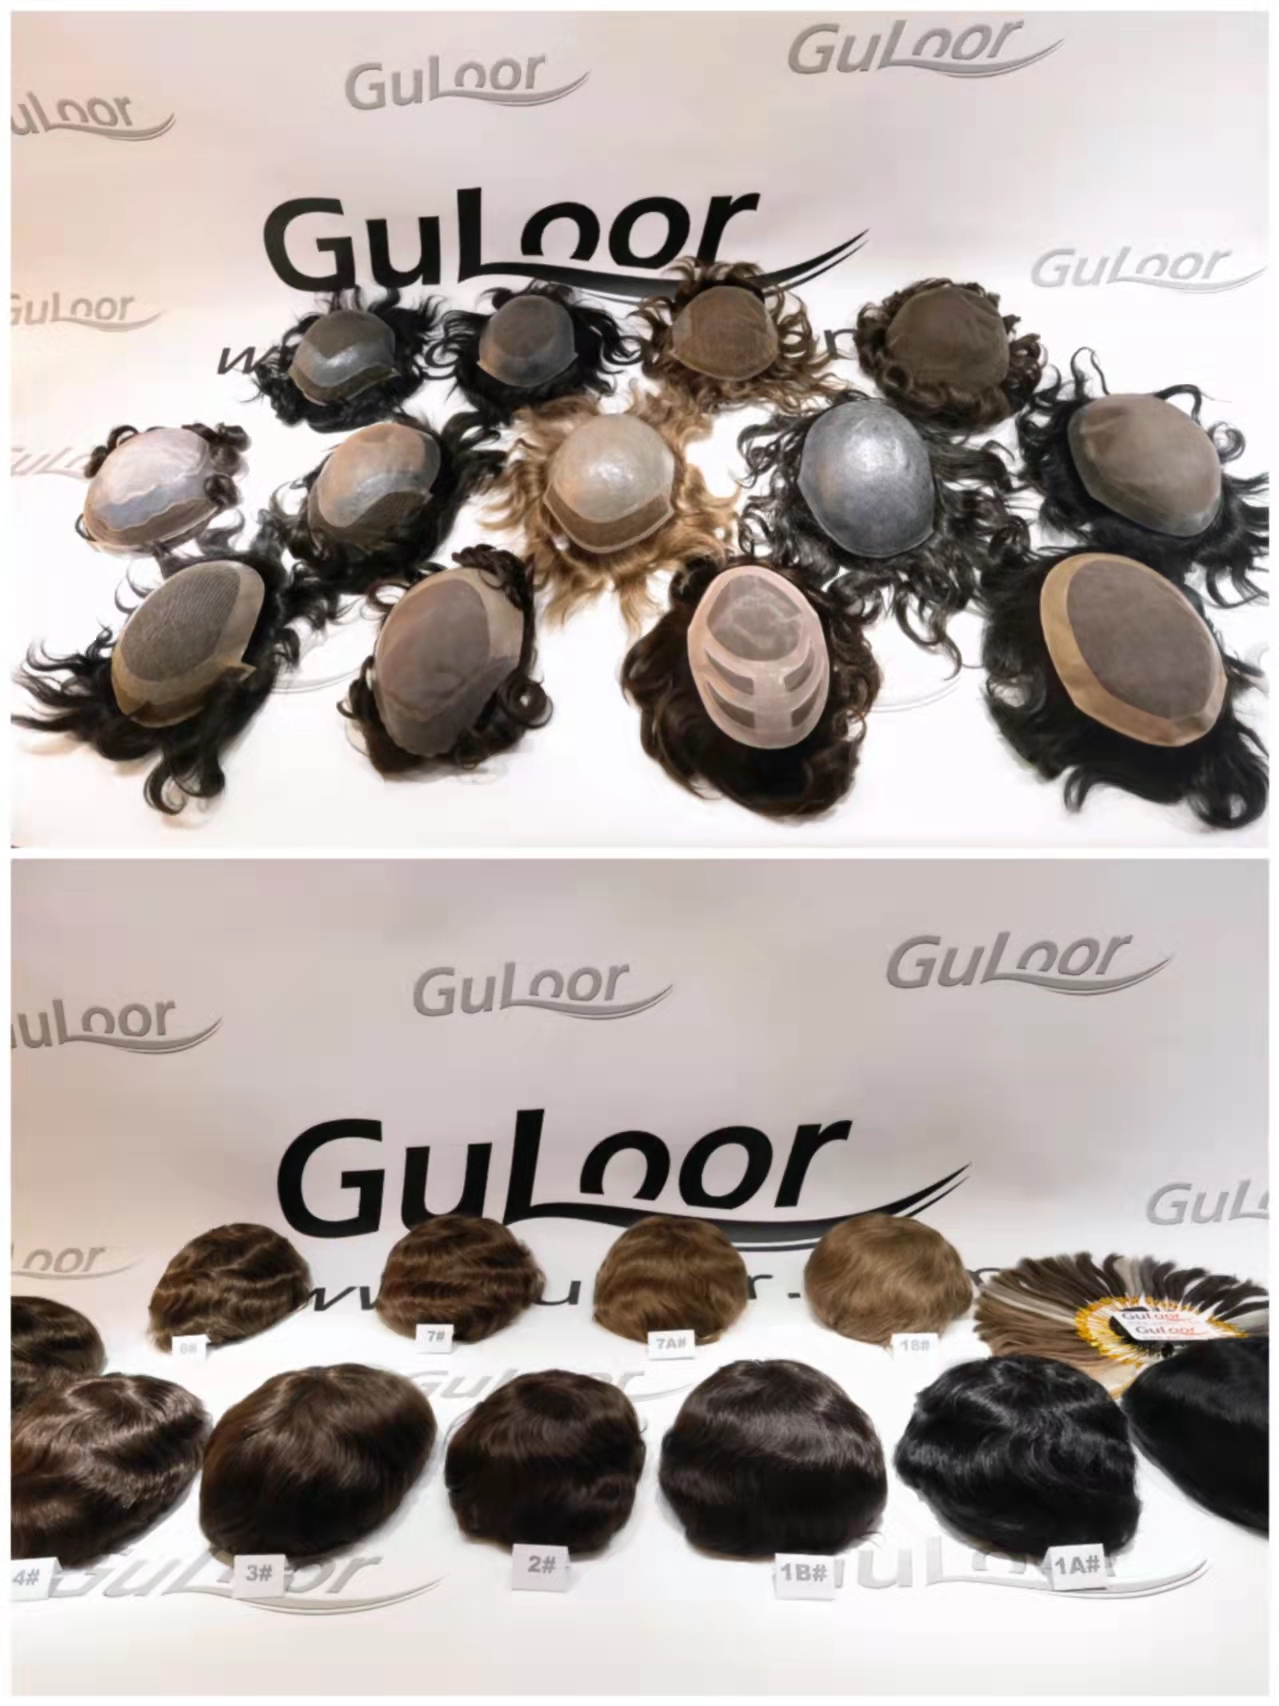 Why choose Guloor's hair products?